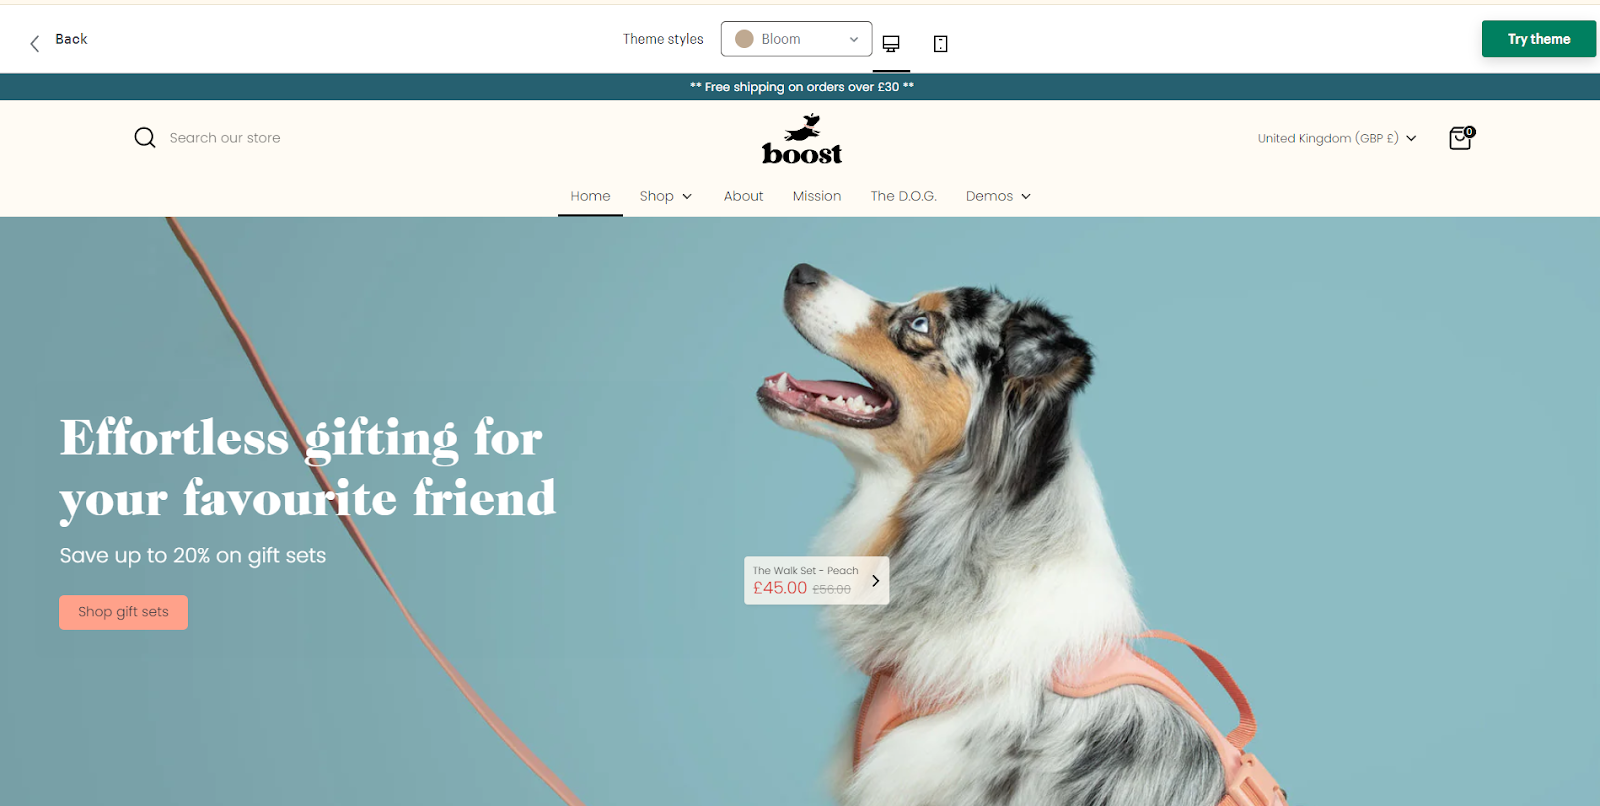 Boost is another great Shopify theme for pet stores, offering a stylish, modern look that you can easily customize to match your brand. It's also built for speed, ensuring a smooth customer shopping experience.